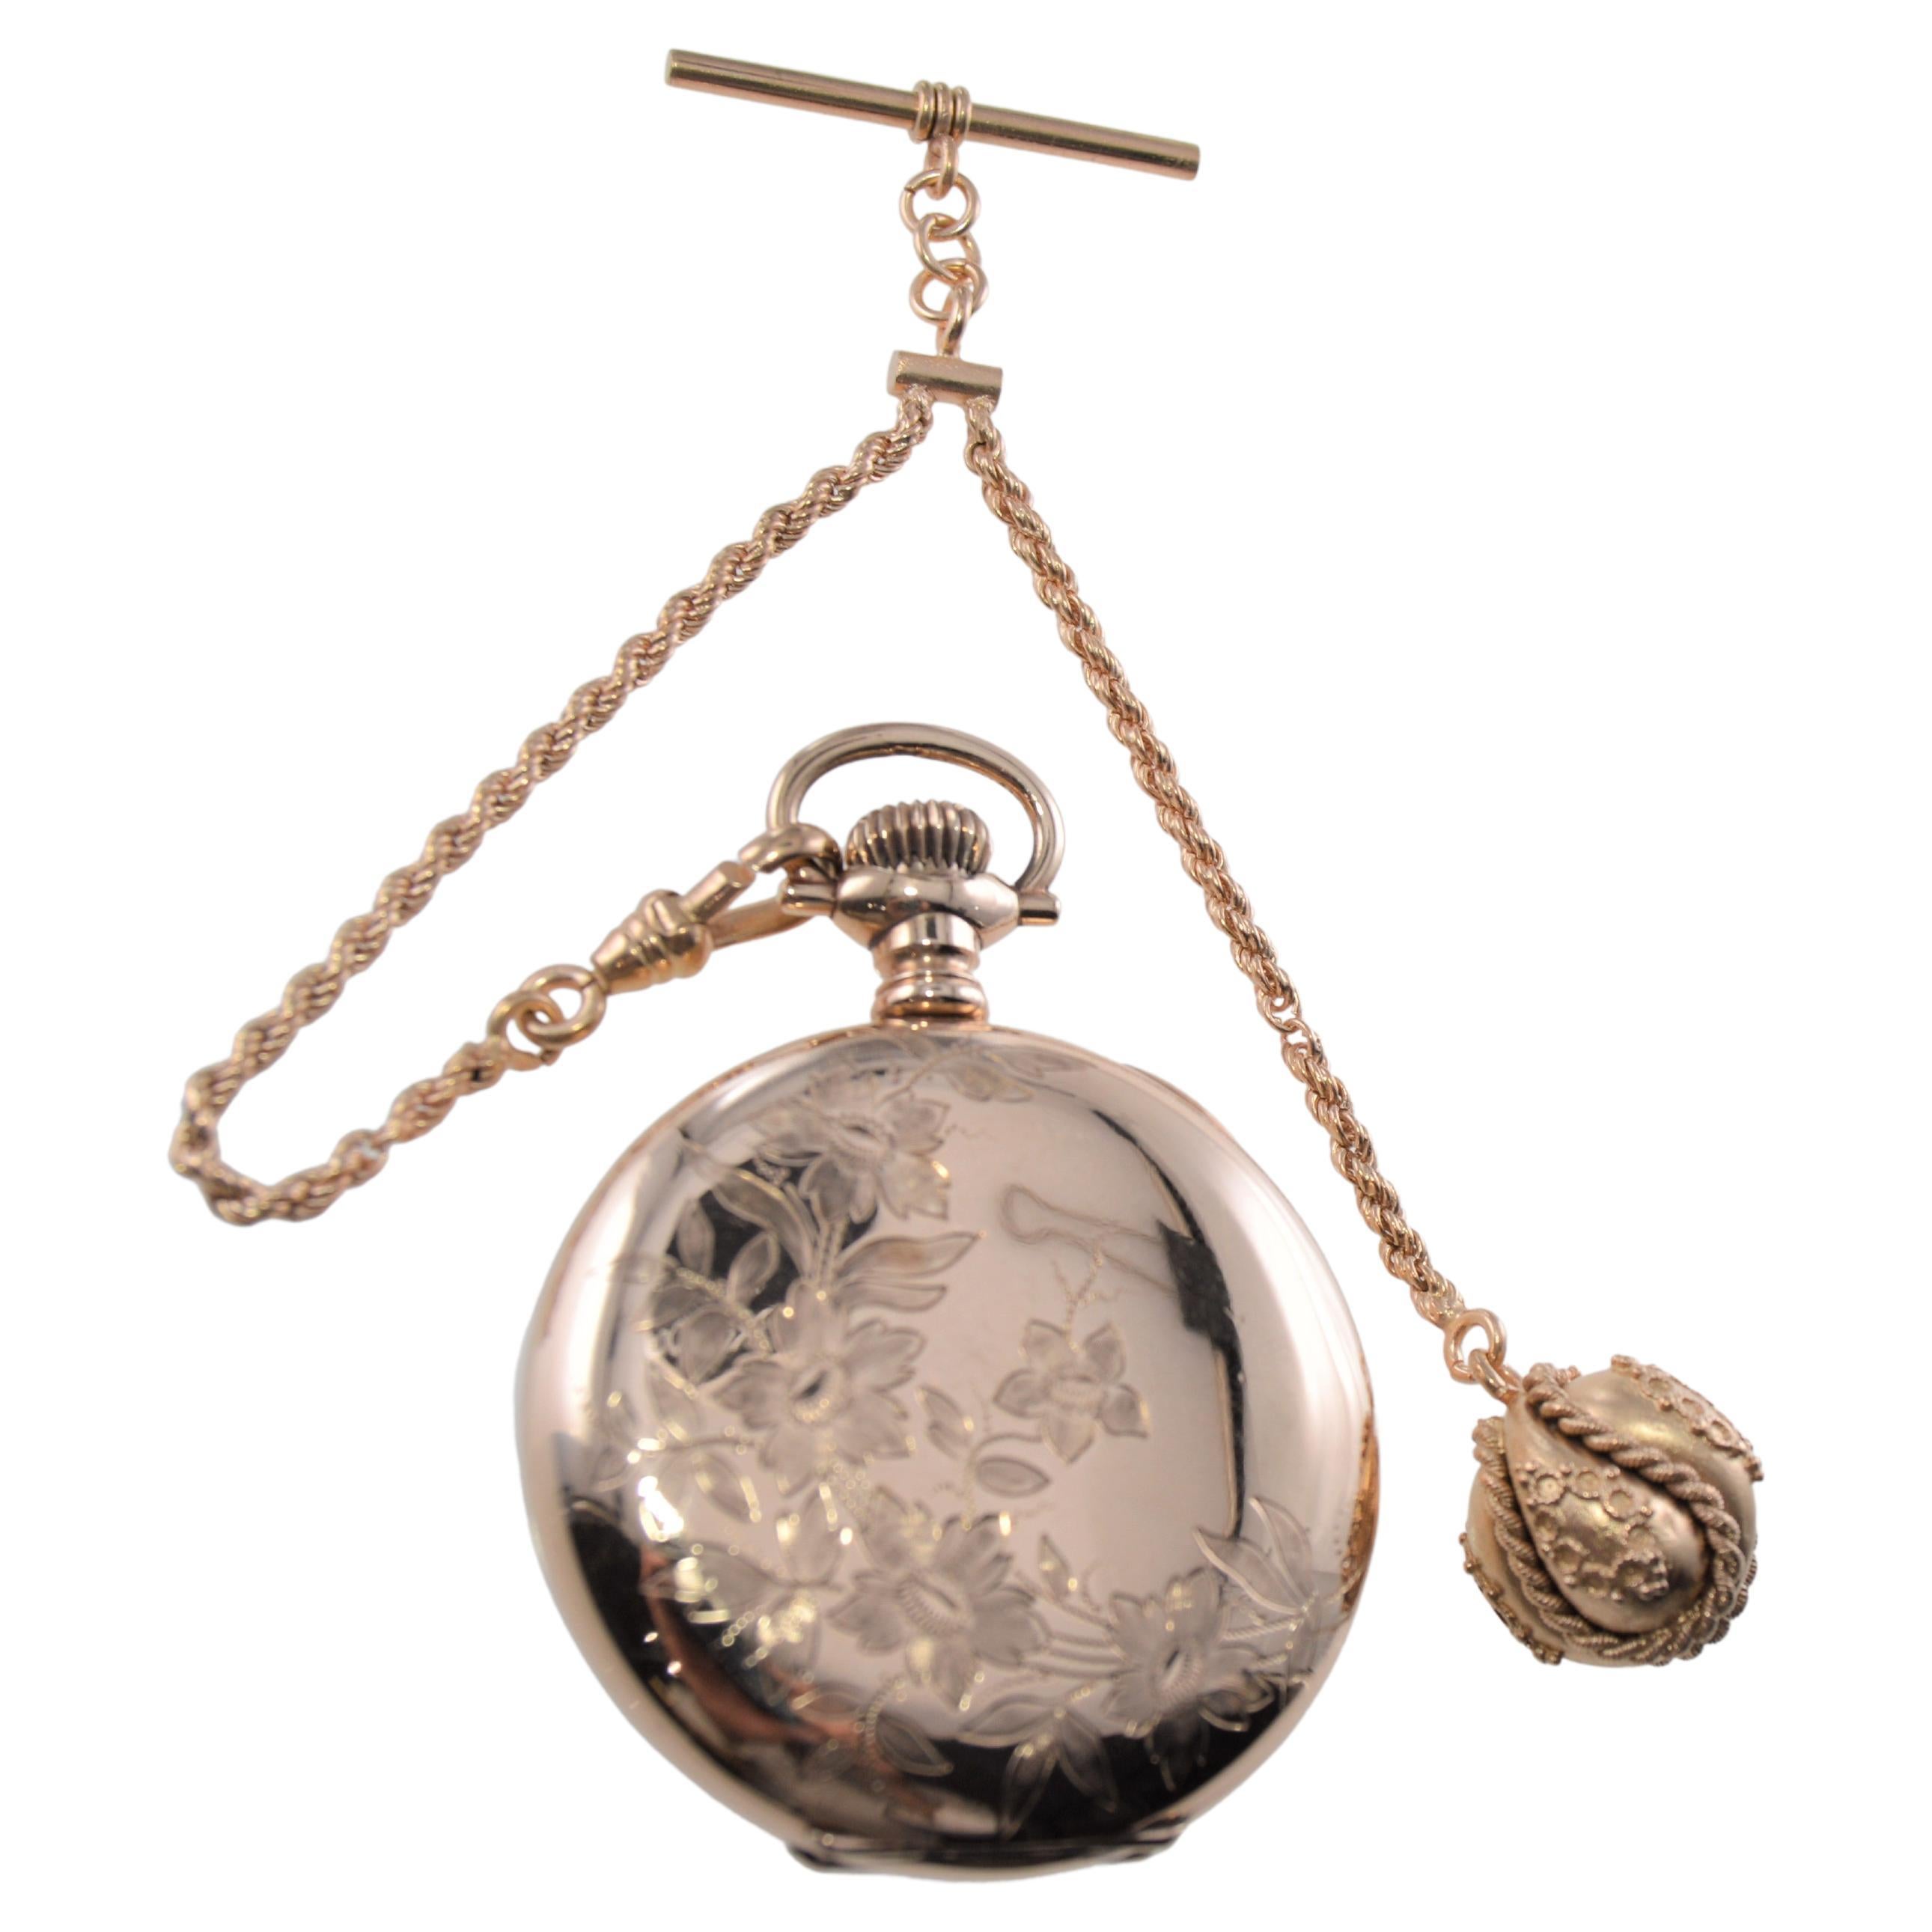 Elgin Gold Filled Pocket Watch with Unique Floral Engraving, circa 1907 For Sale